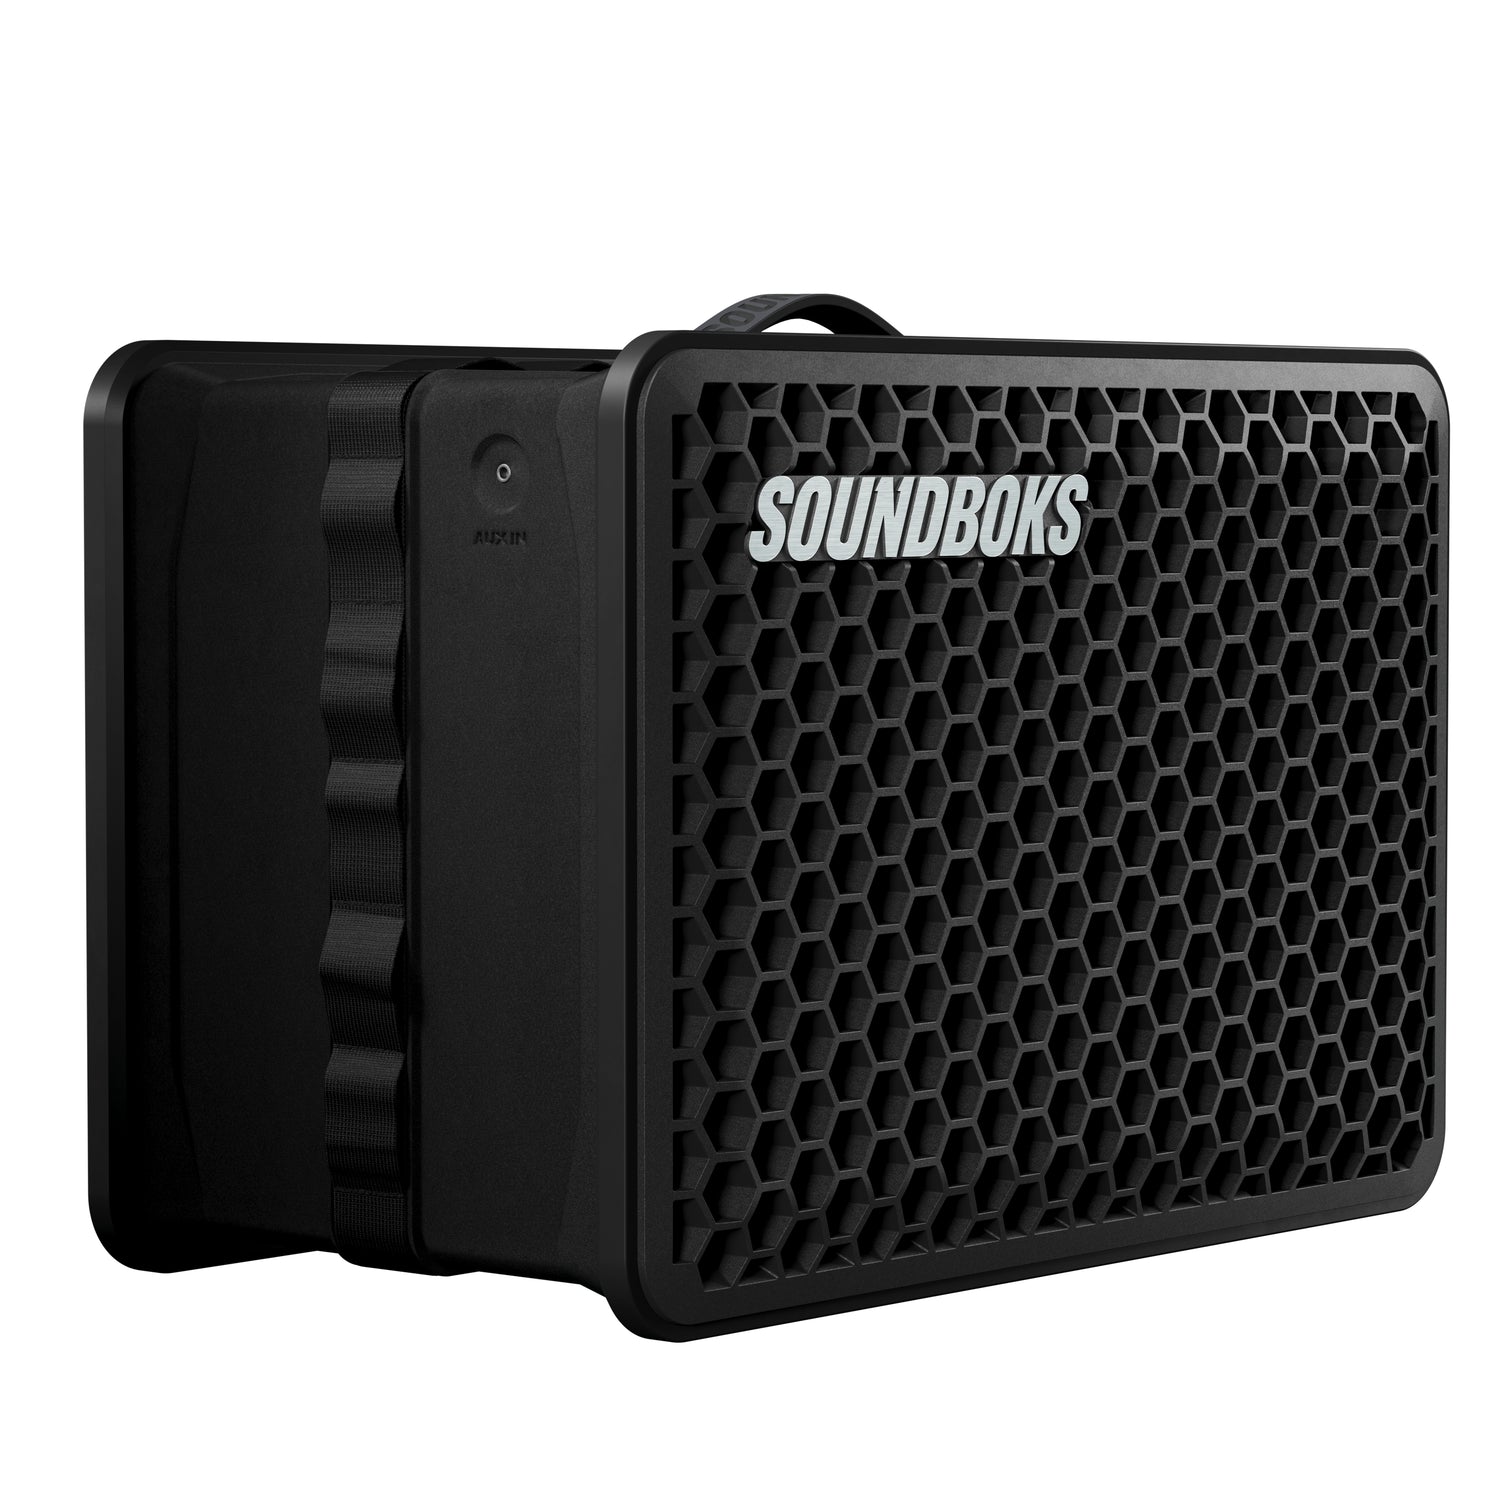 SOUNDBOKS GEN 3 Speaker Rocks The Party & Hits All Of The High Notes